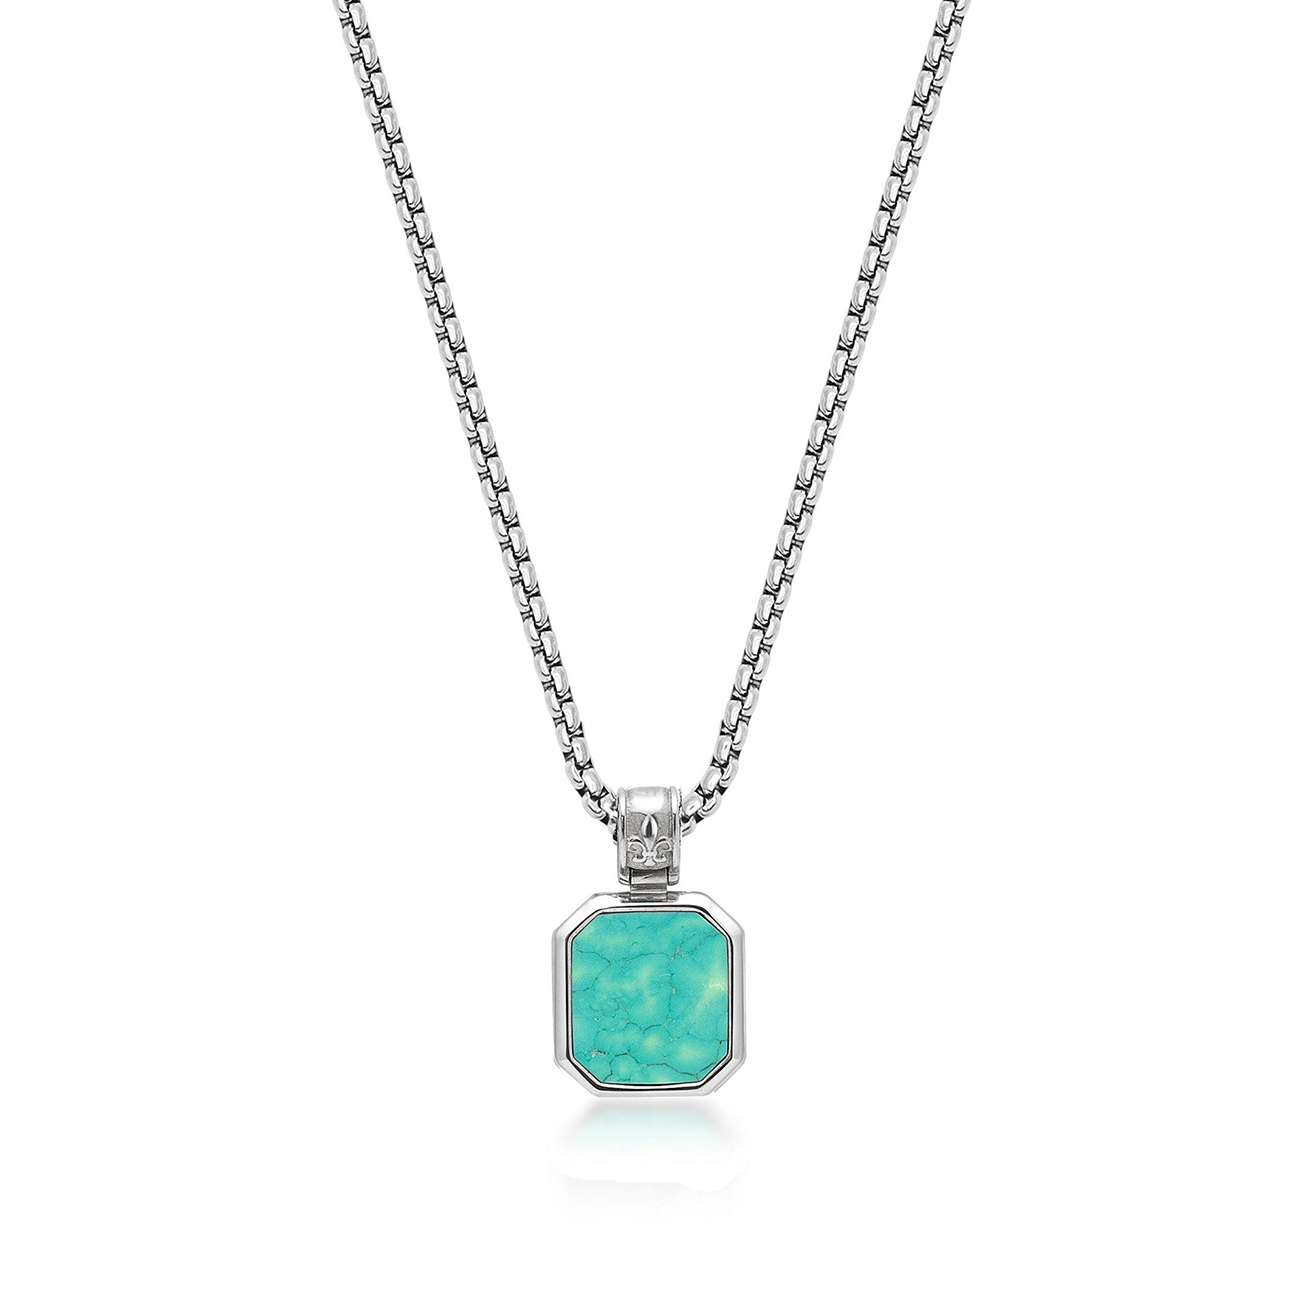 Nialaya Silver Necklace with Square Turquoise Pendant